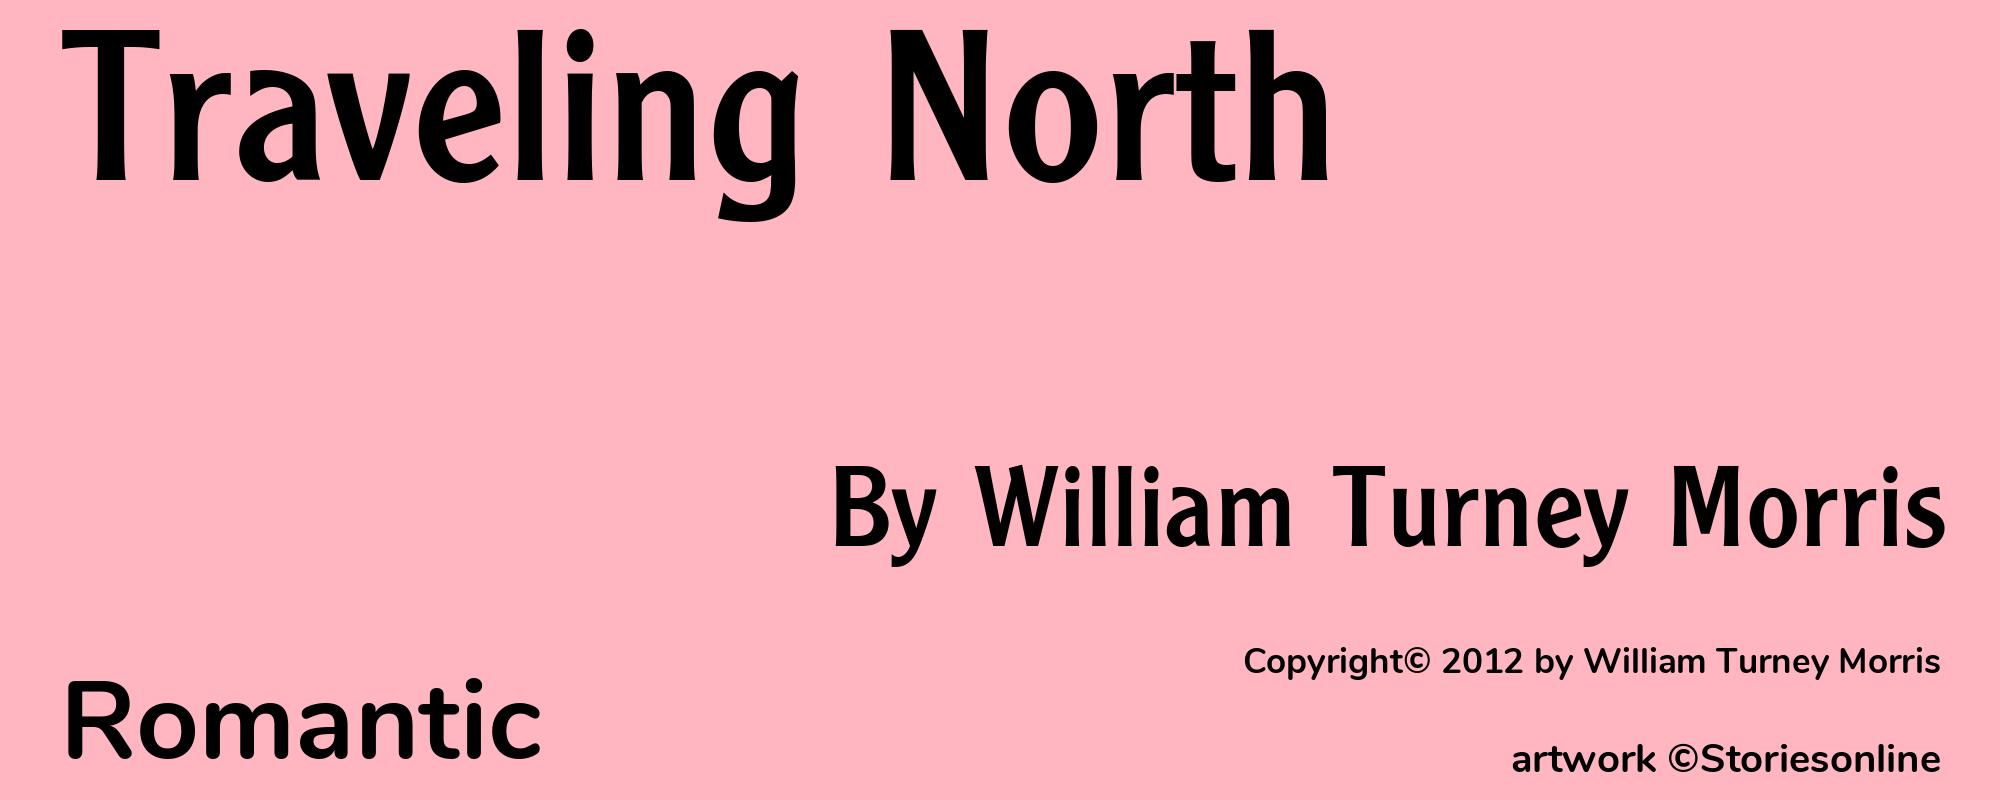 Traveling North - Cover